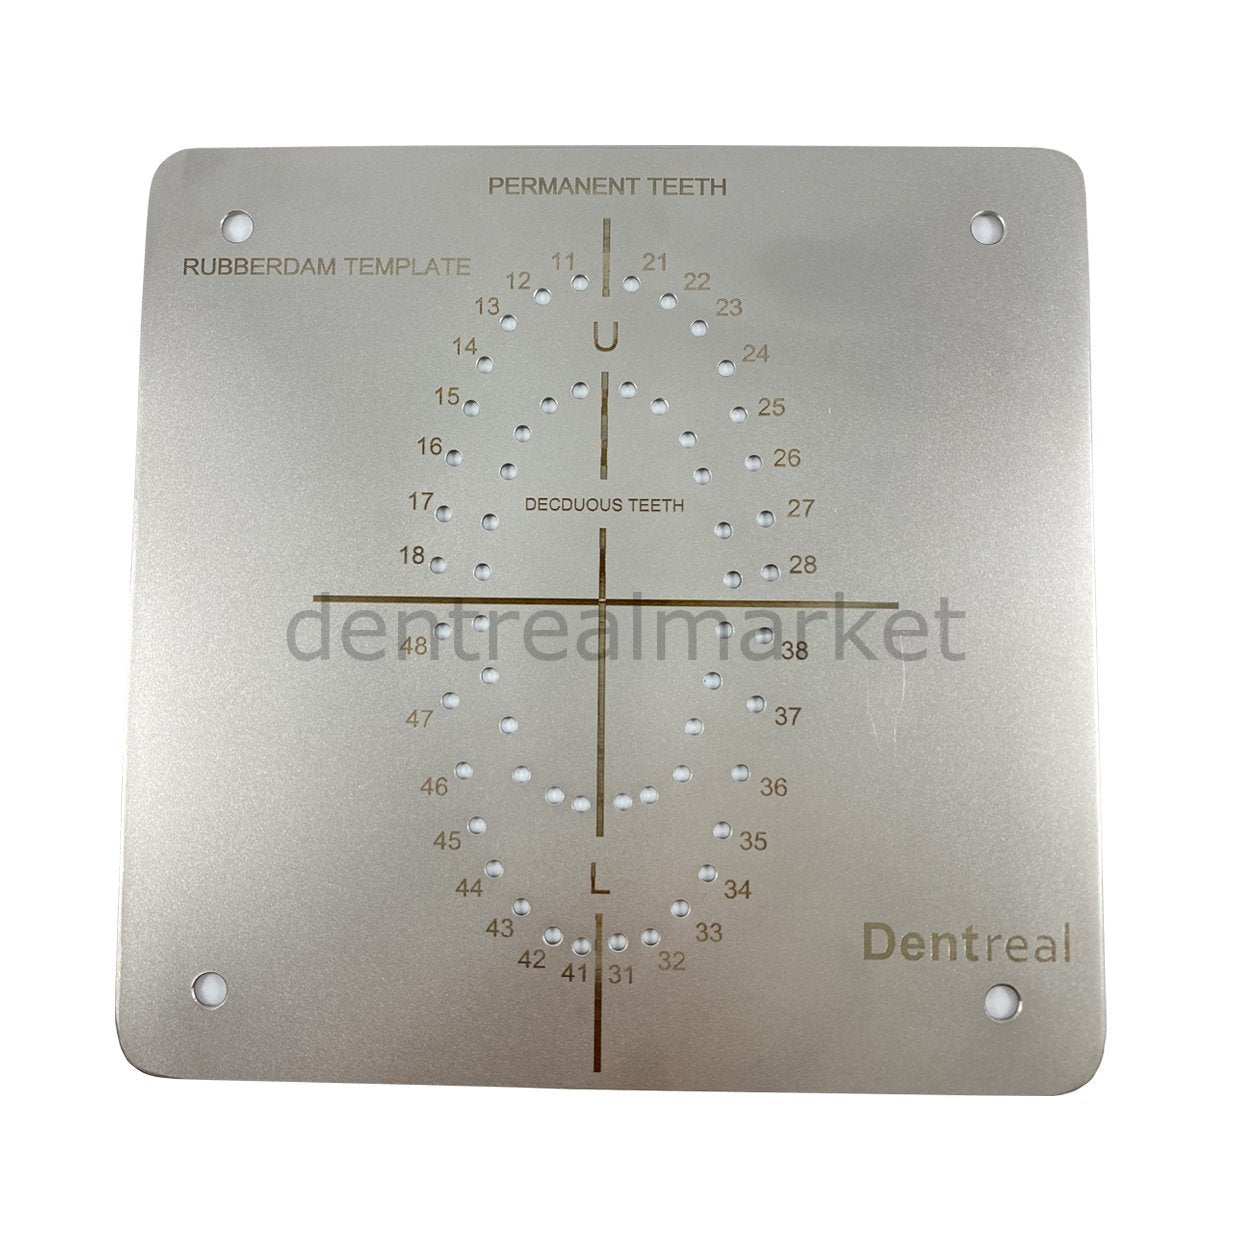 DentrealStore - Dentreal Drm Rubberdam Clamp and Tool Set + Rubberdam Template